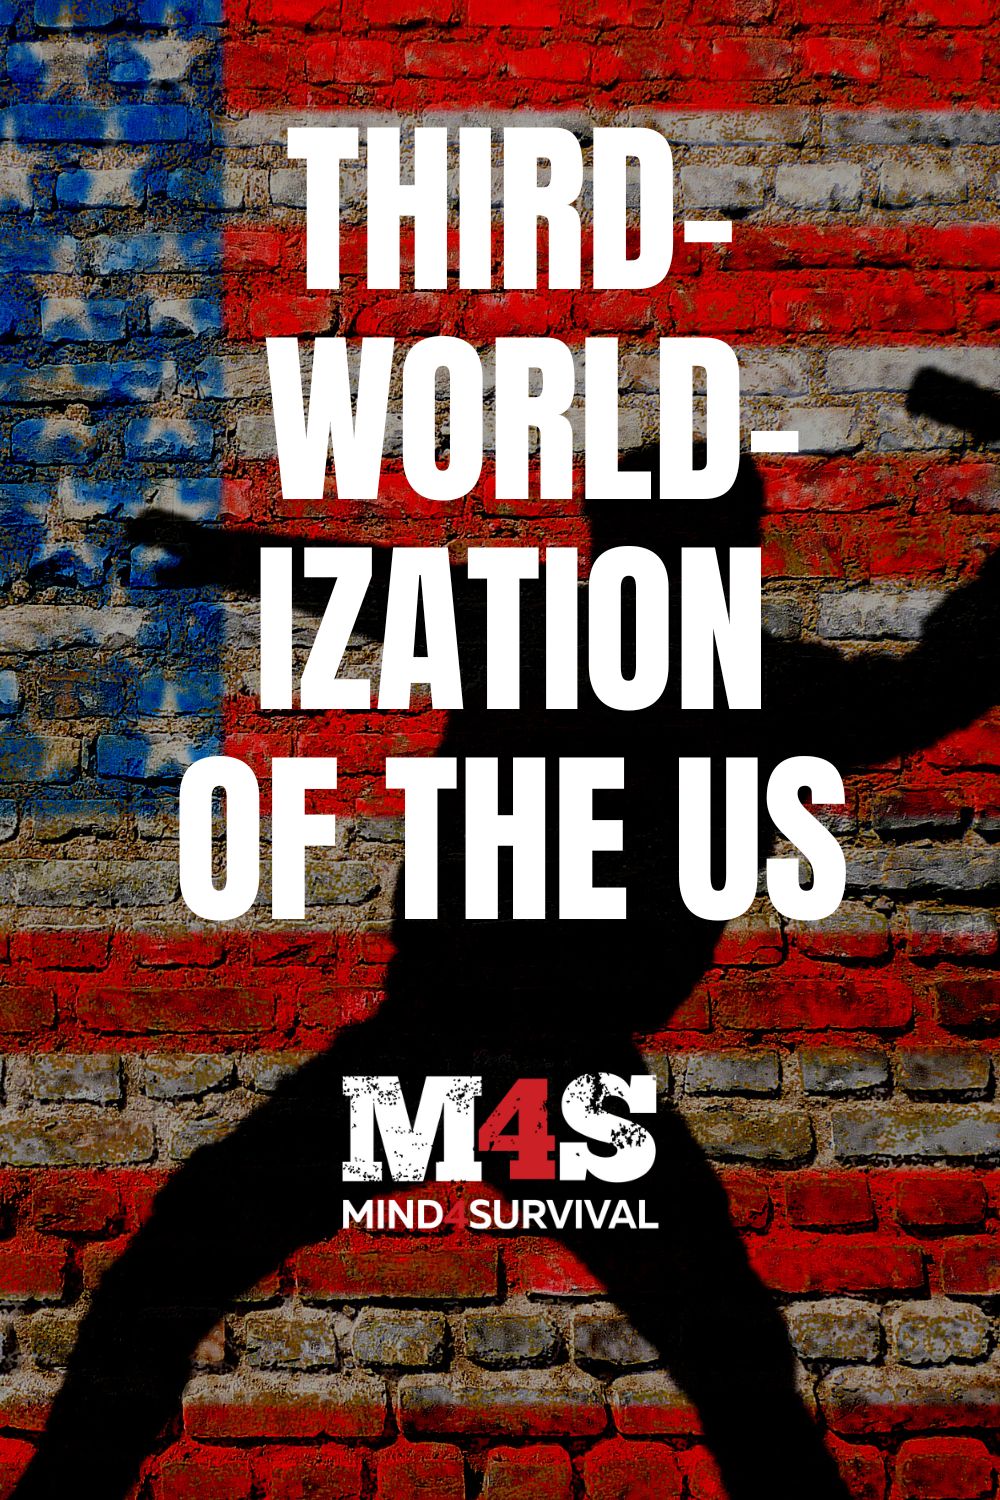 143: Thirdworldization of the U.S. and the Stages of a Collapse